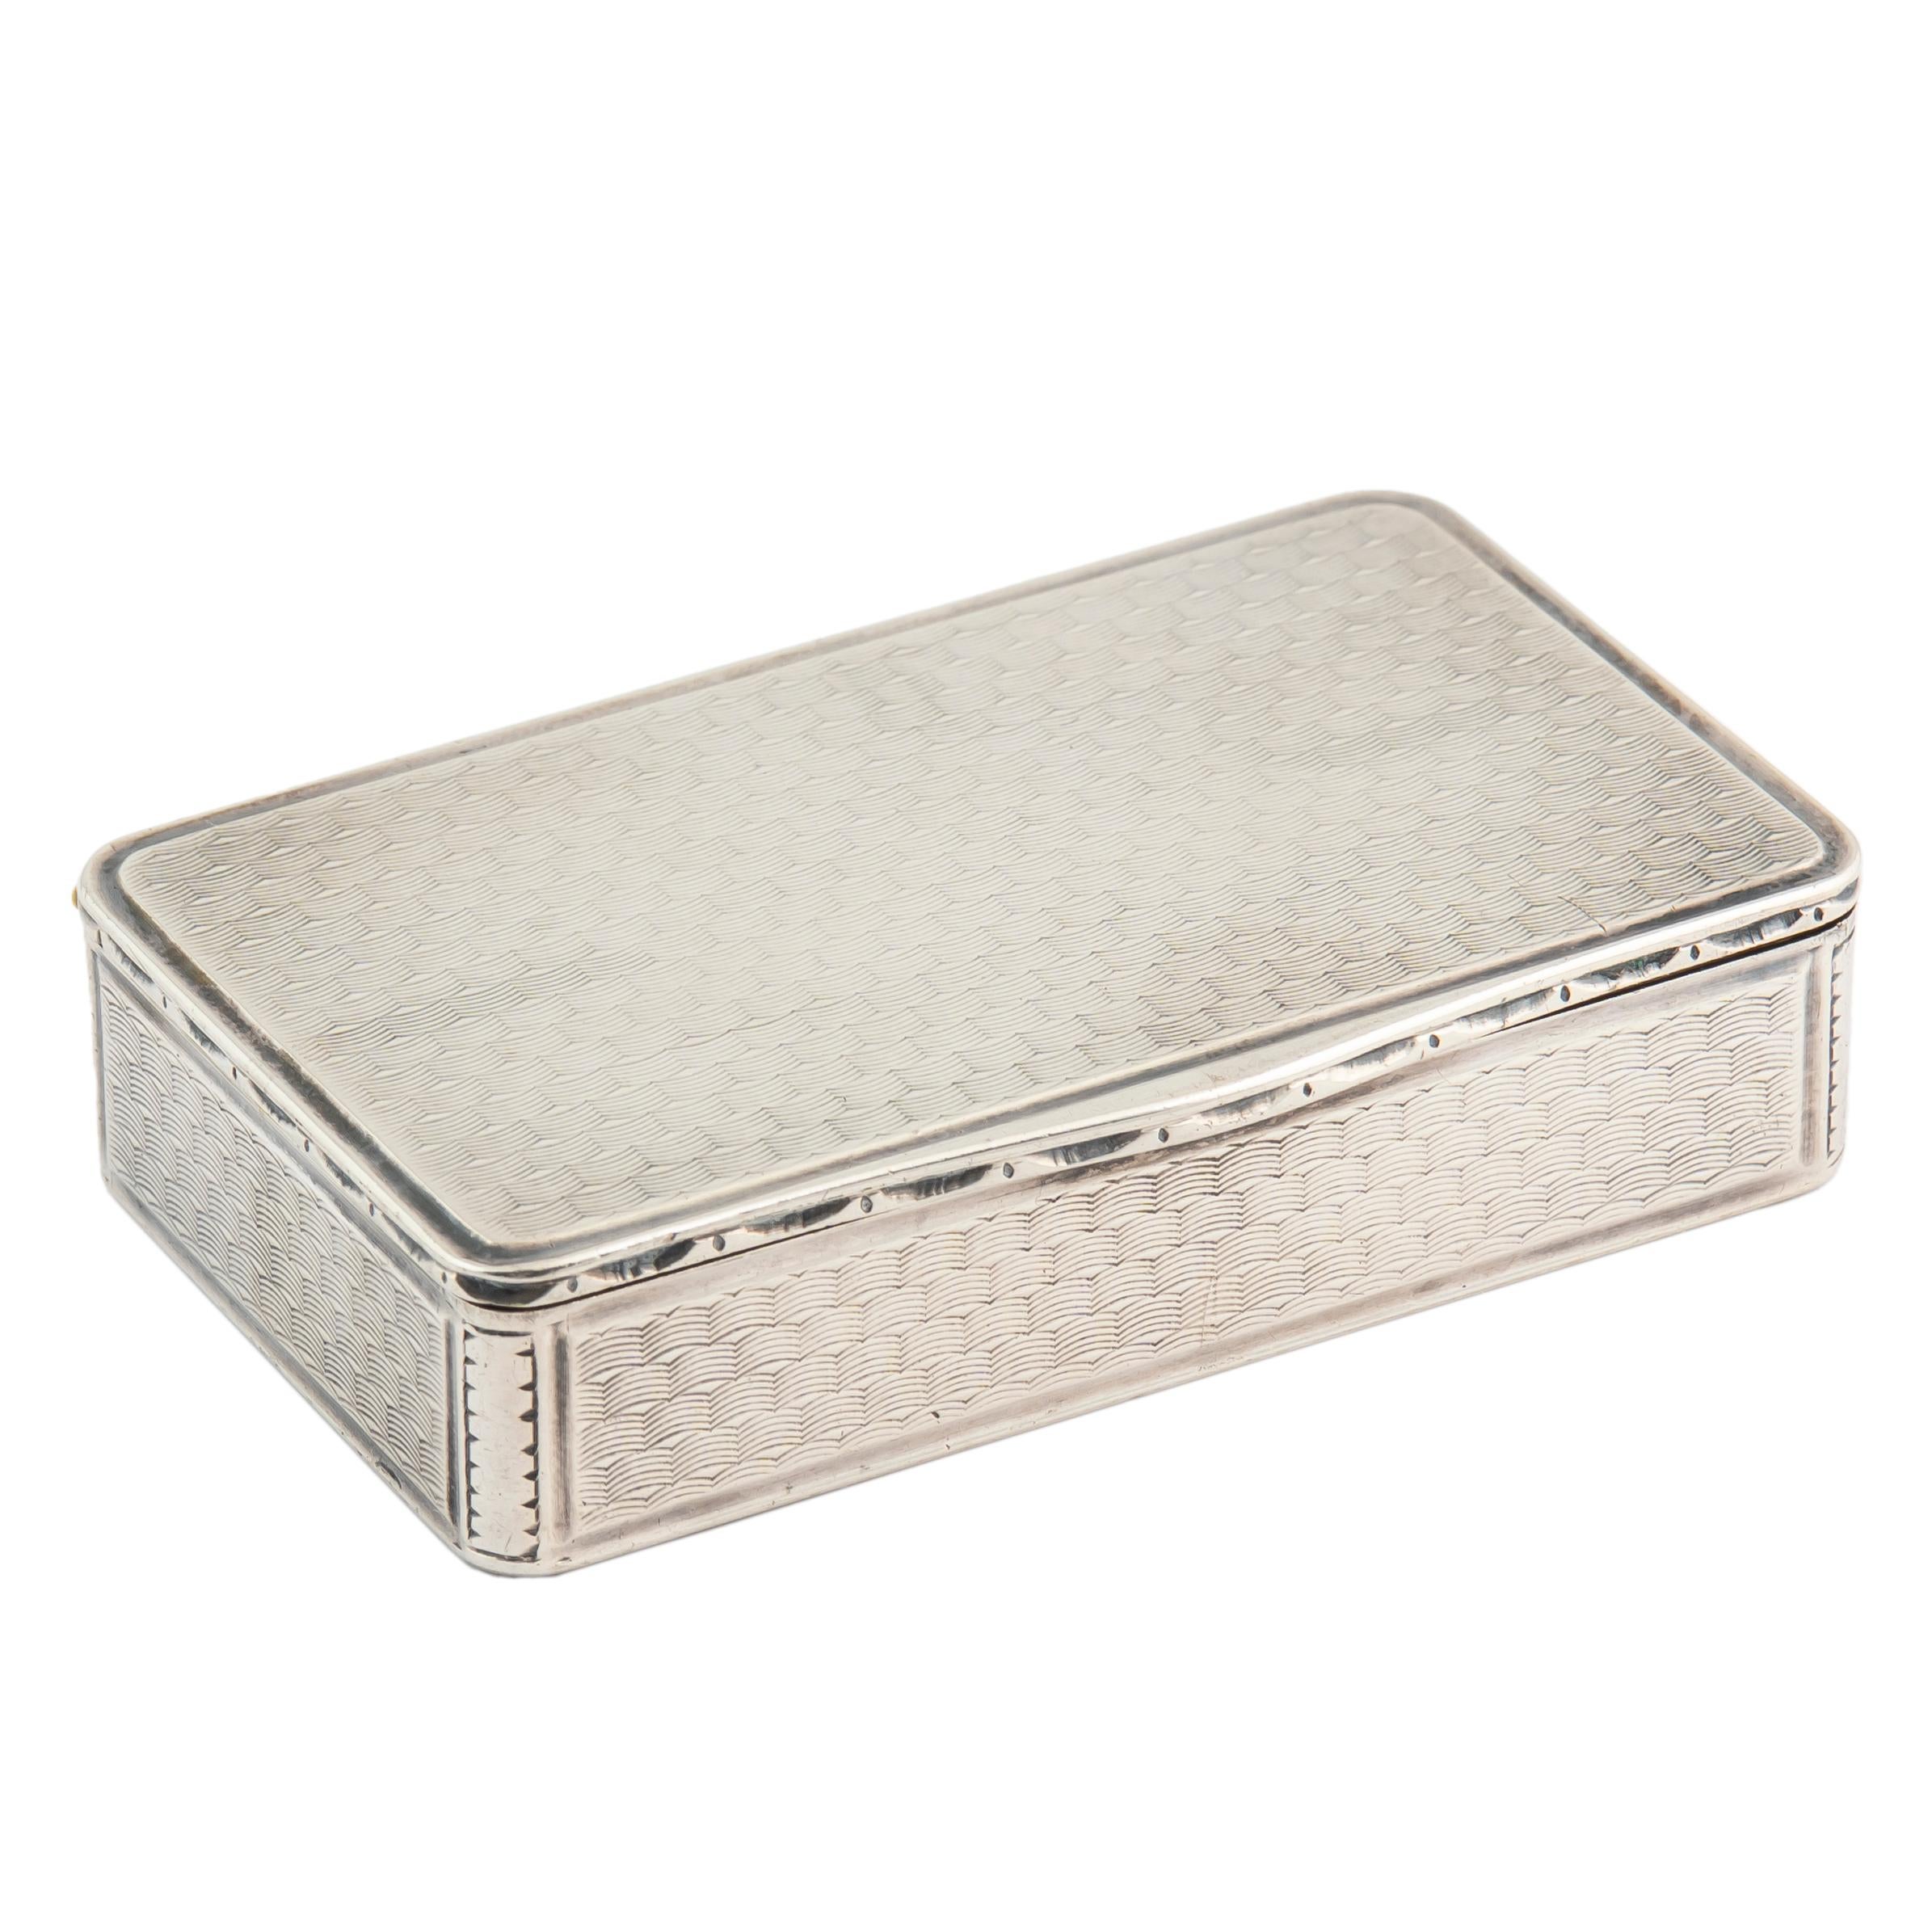 An elegant French silver tabatière or snuff box, overall decorated with guilloché or engine-turned panels, in a regular wavy pattern creating the illusion of movement. In fine condition with original gilded or vermeil interior. The French invented